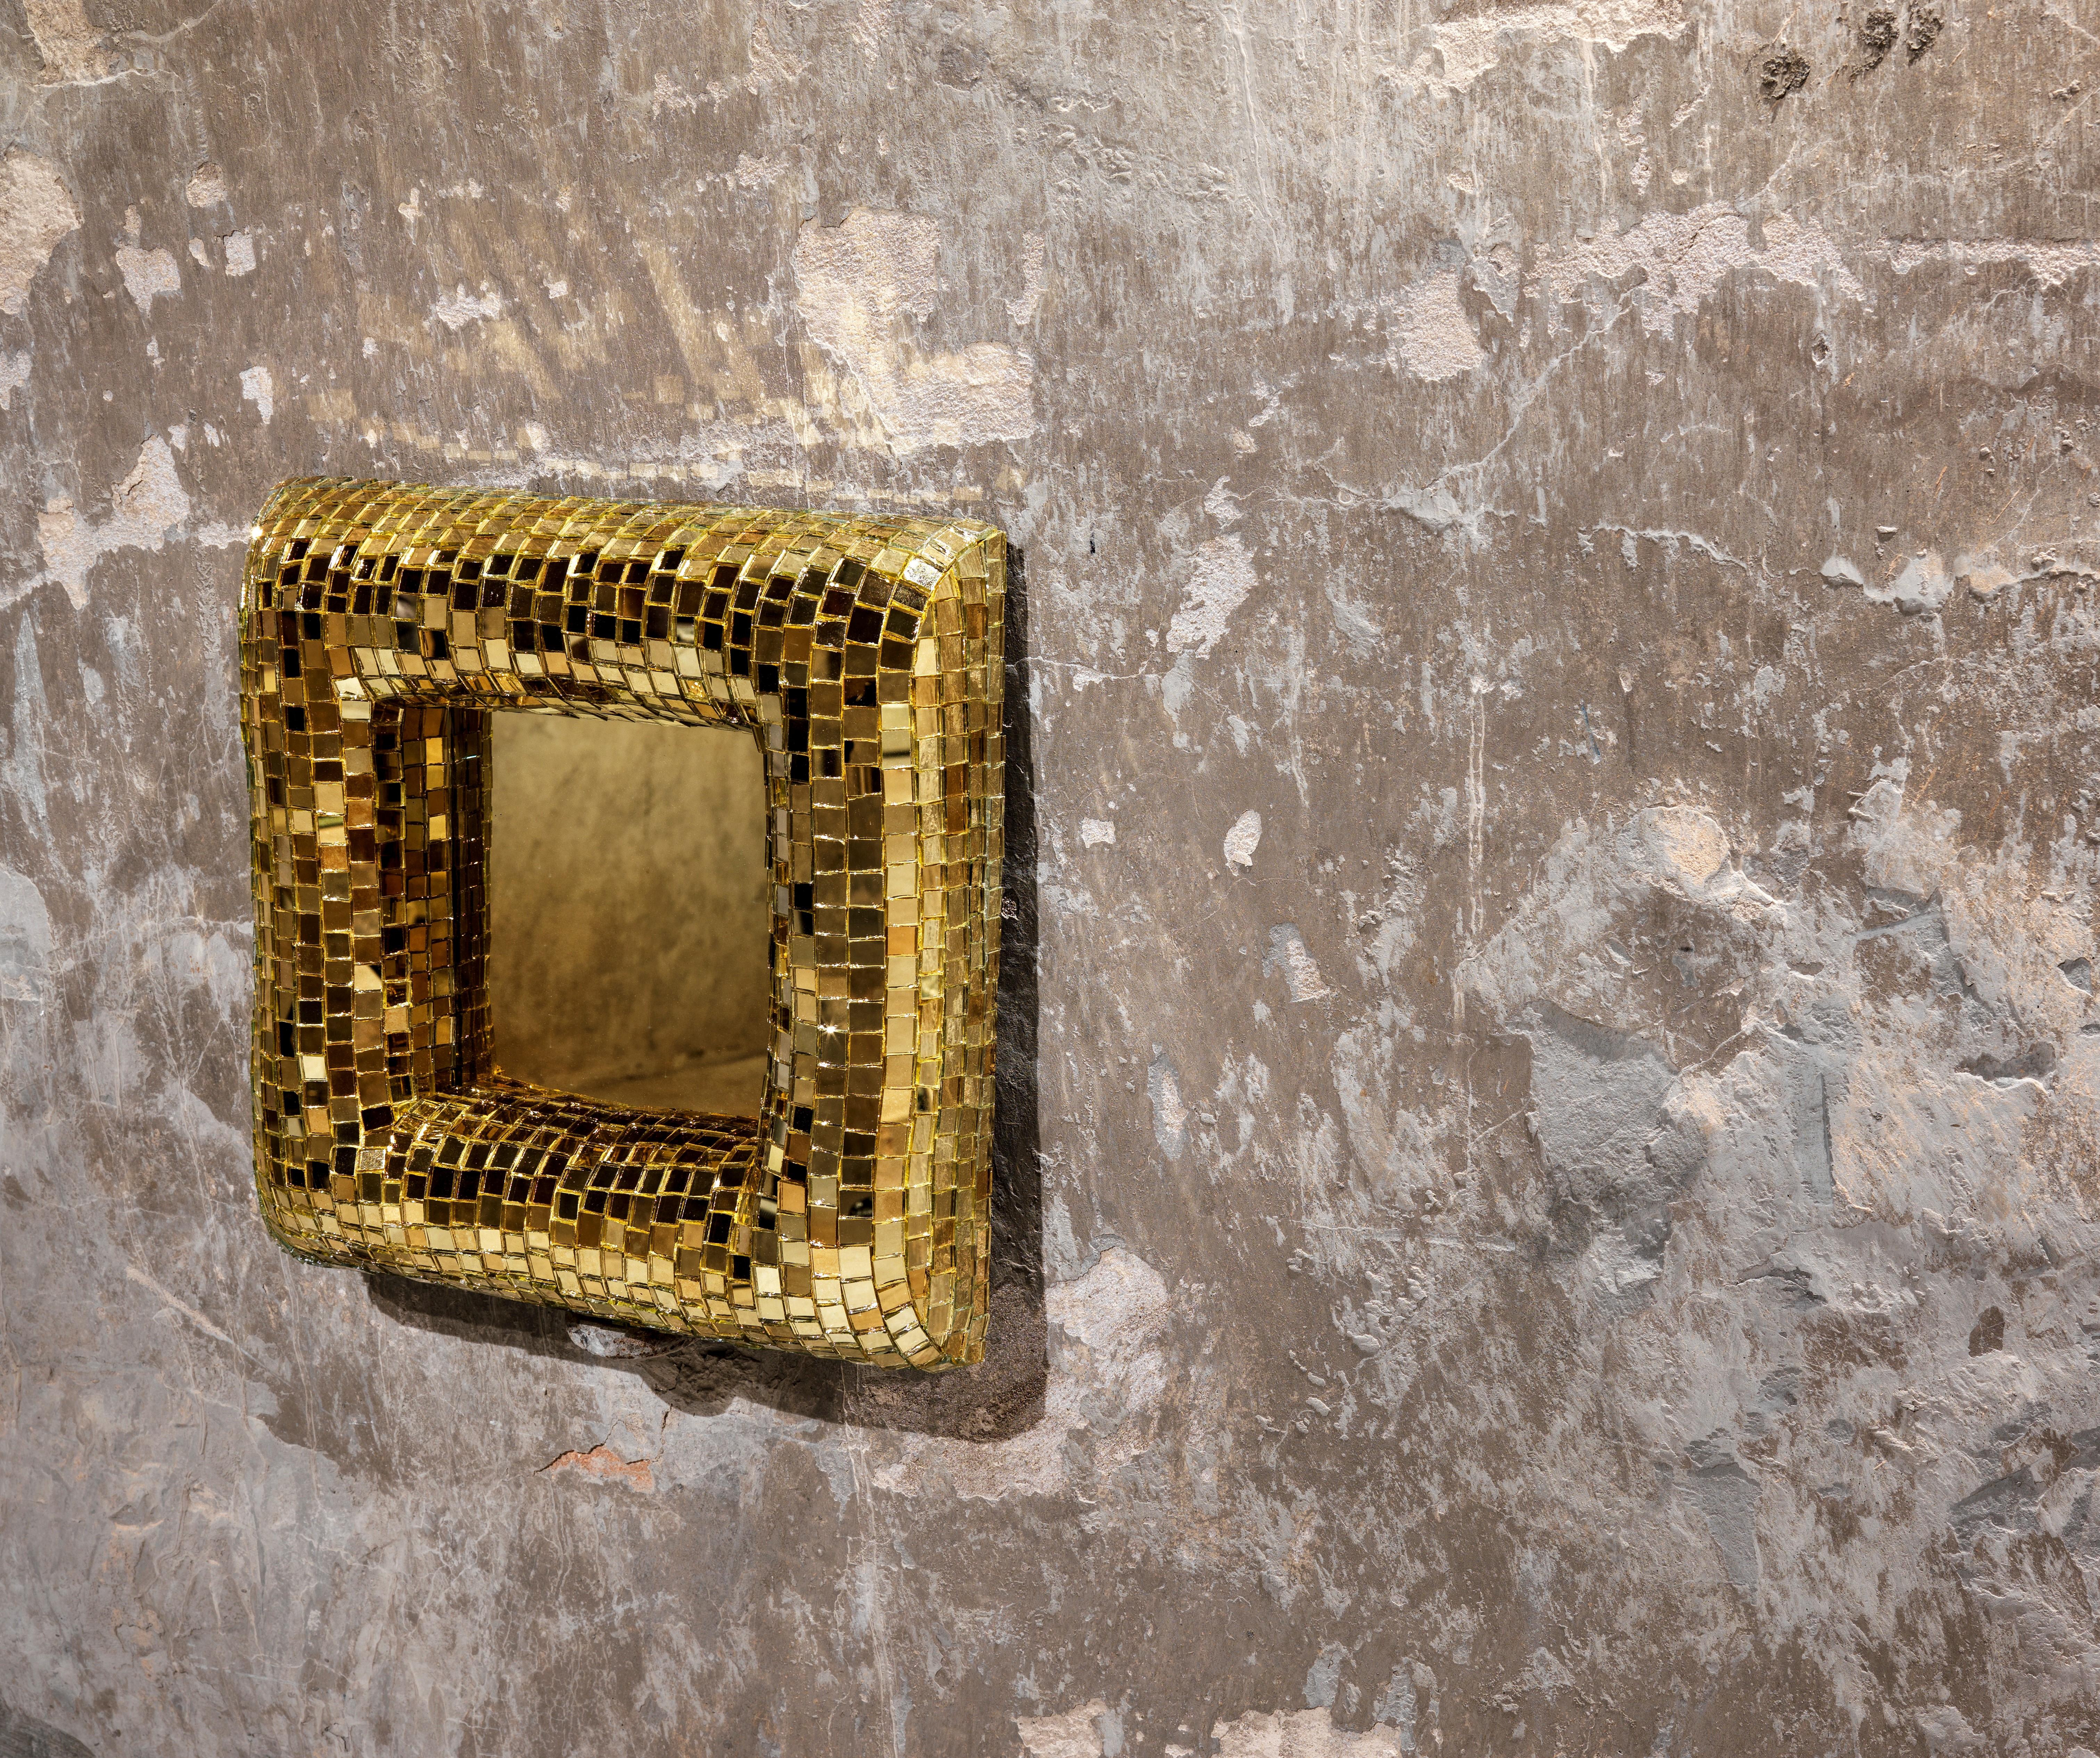 Gold rounded mirror by Davide Medri
Materials: mirror mosaic
Dimensions: W 40 x H 40 cm
Also Available in silver and in 3 sizes: 40 x 40, 60 x 60, 80 x 80 cm


Davide Medri was born in Cesena on August 7th 1967 and graduated at the Academy of